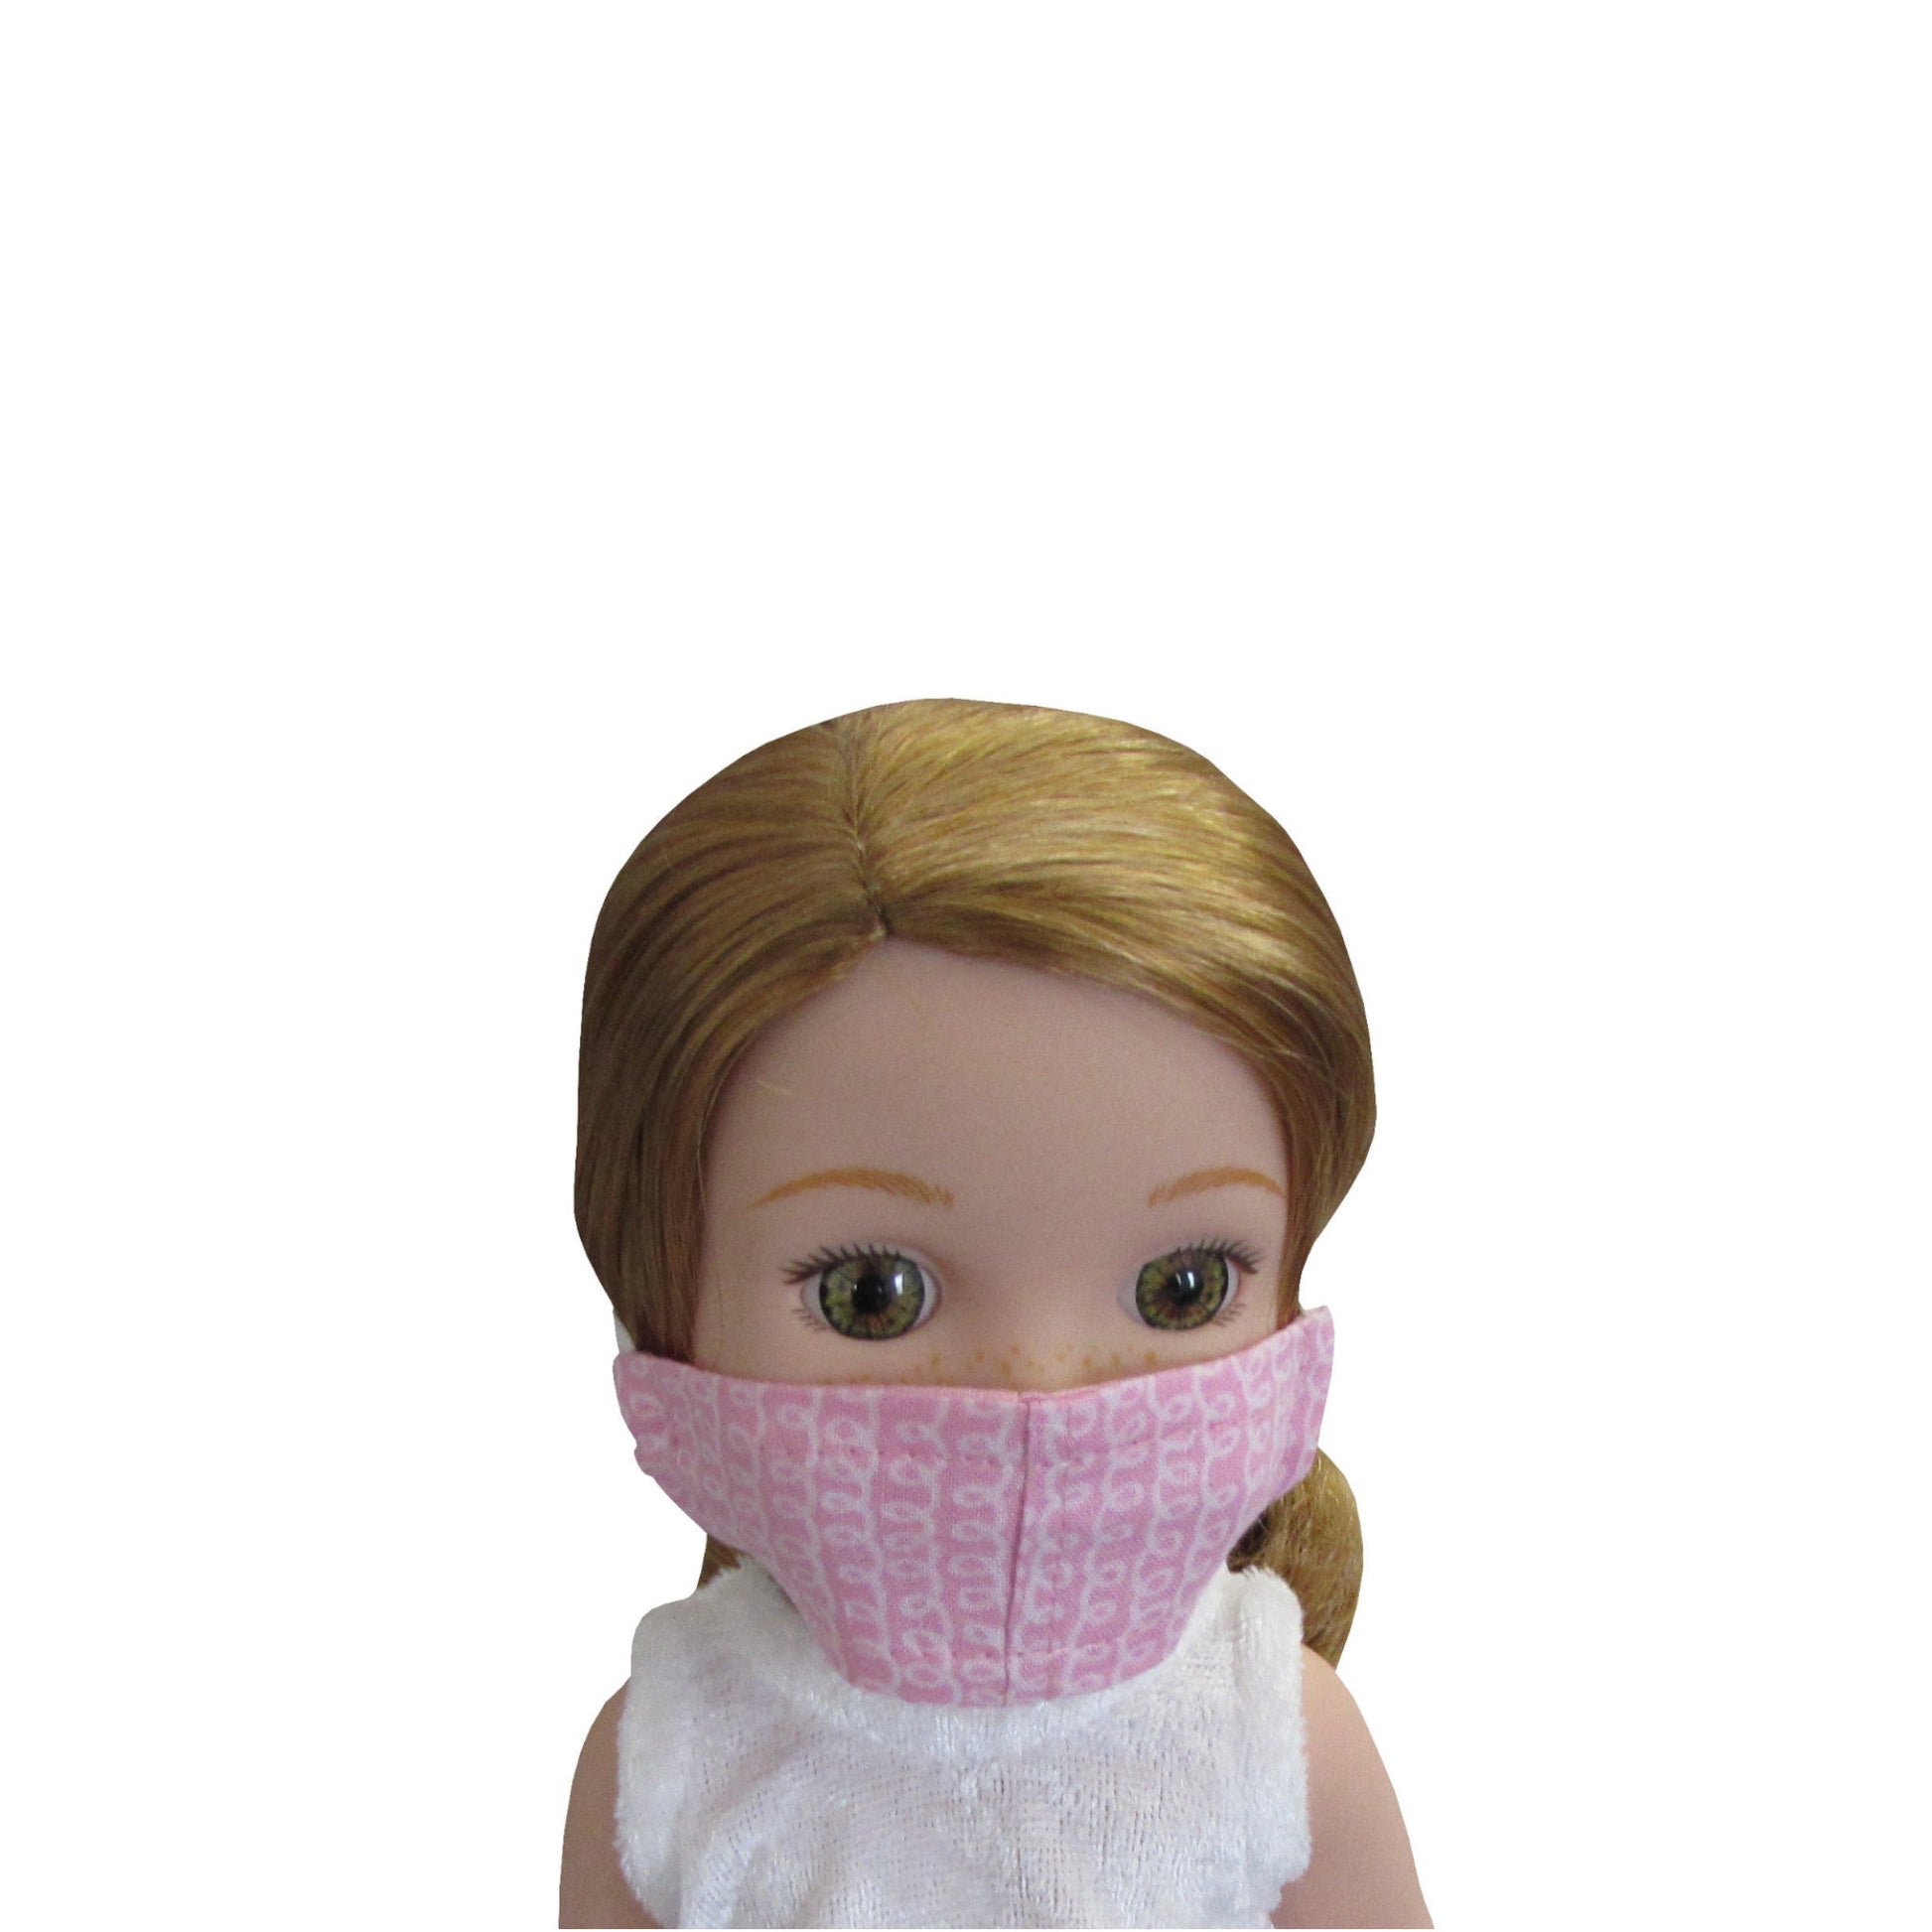 White Curly Design on Pink Print Doll Face Mask for 14 1/2-inch dolls with Wellie Wishers doll Front